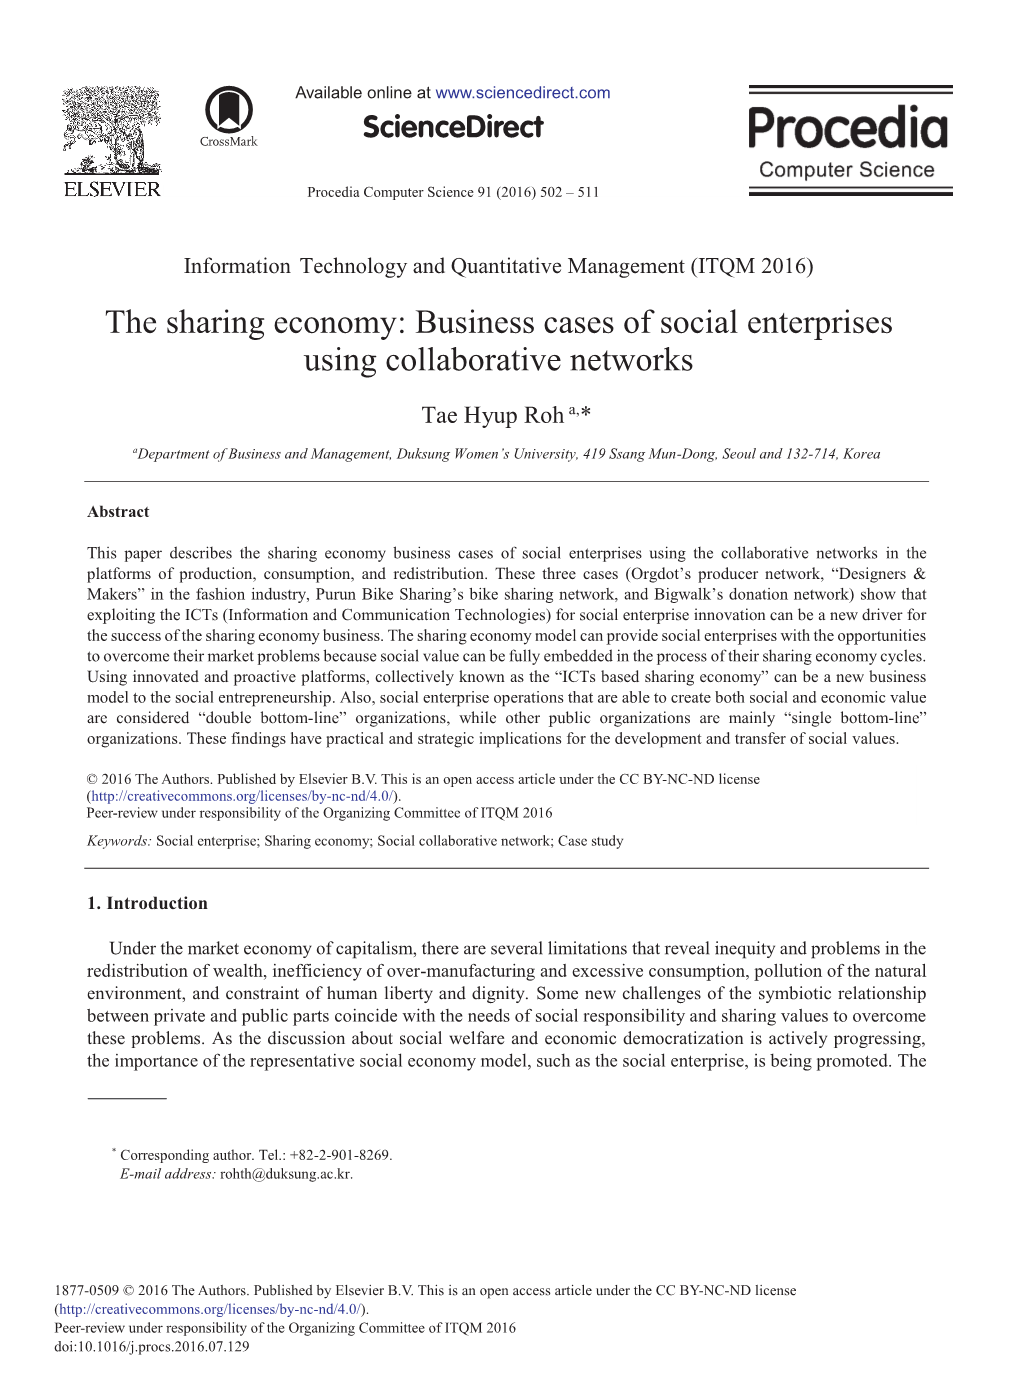 The Sharing Economy: Business Cases of Social Enterprises Using Collaborative Networks